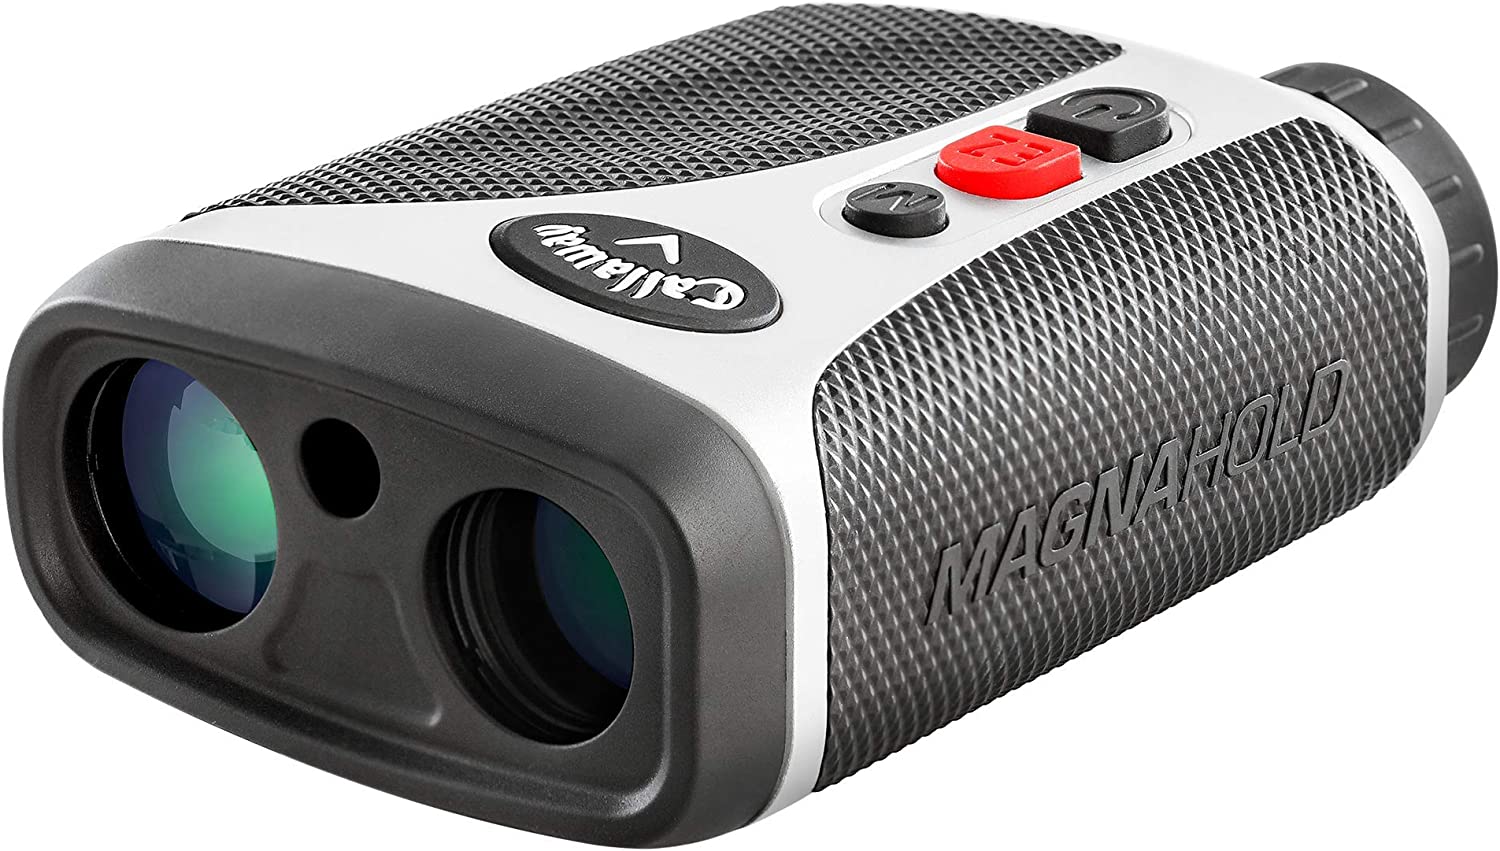 Classic Golf - golf rangefinder with slope and wind